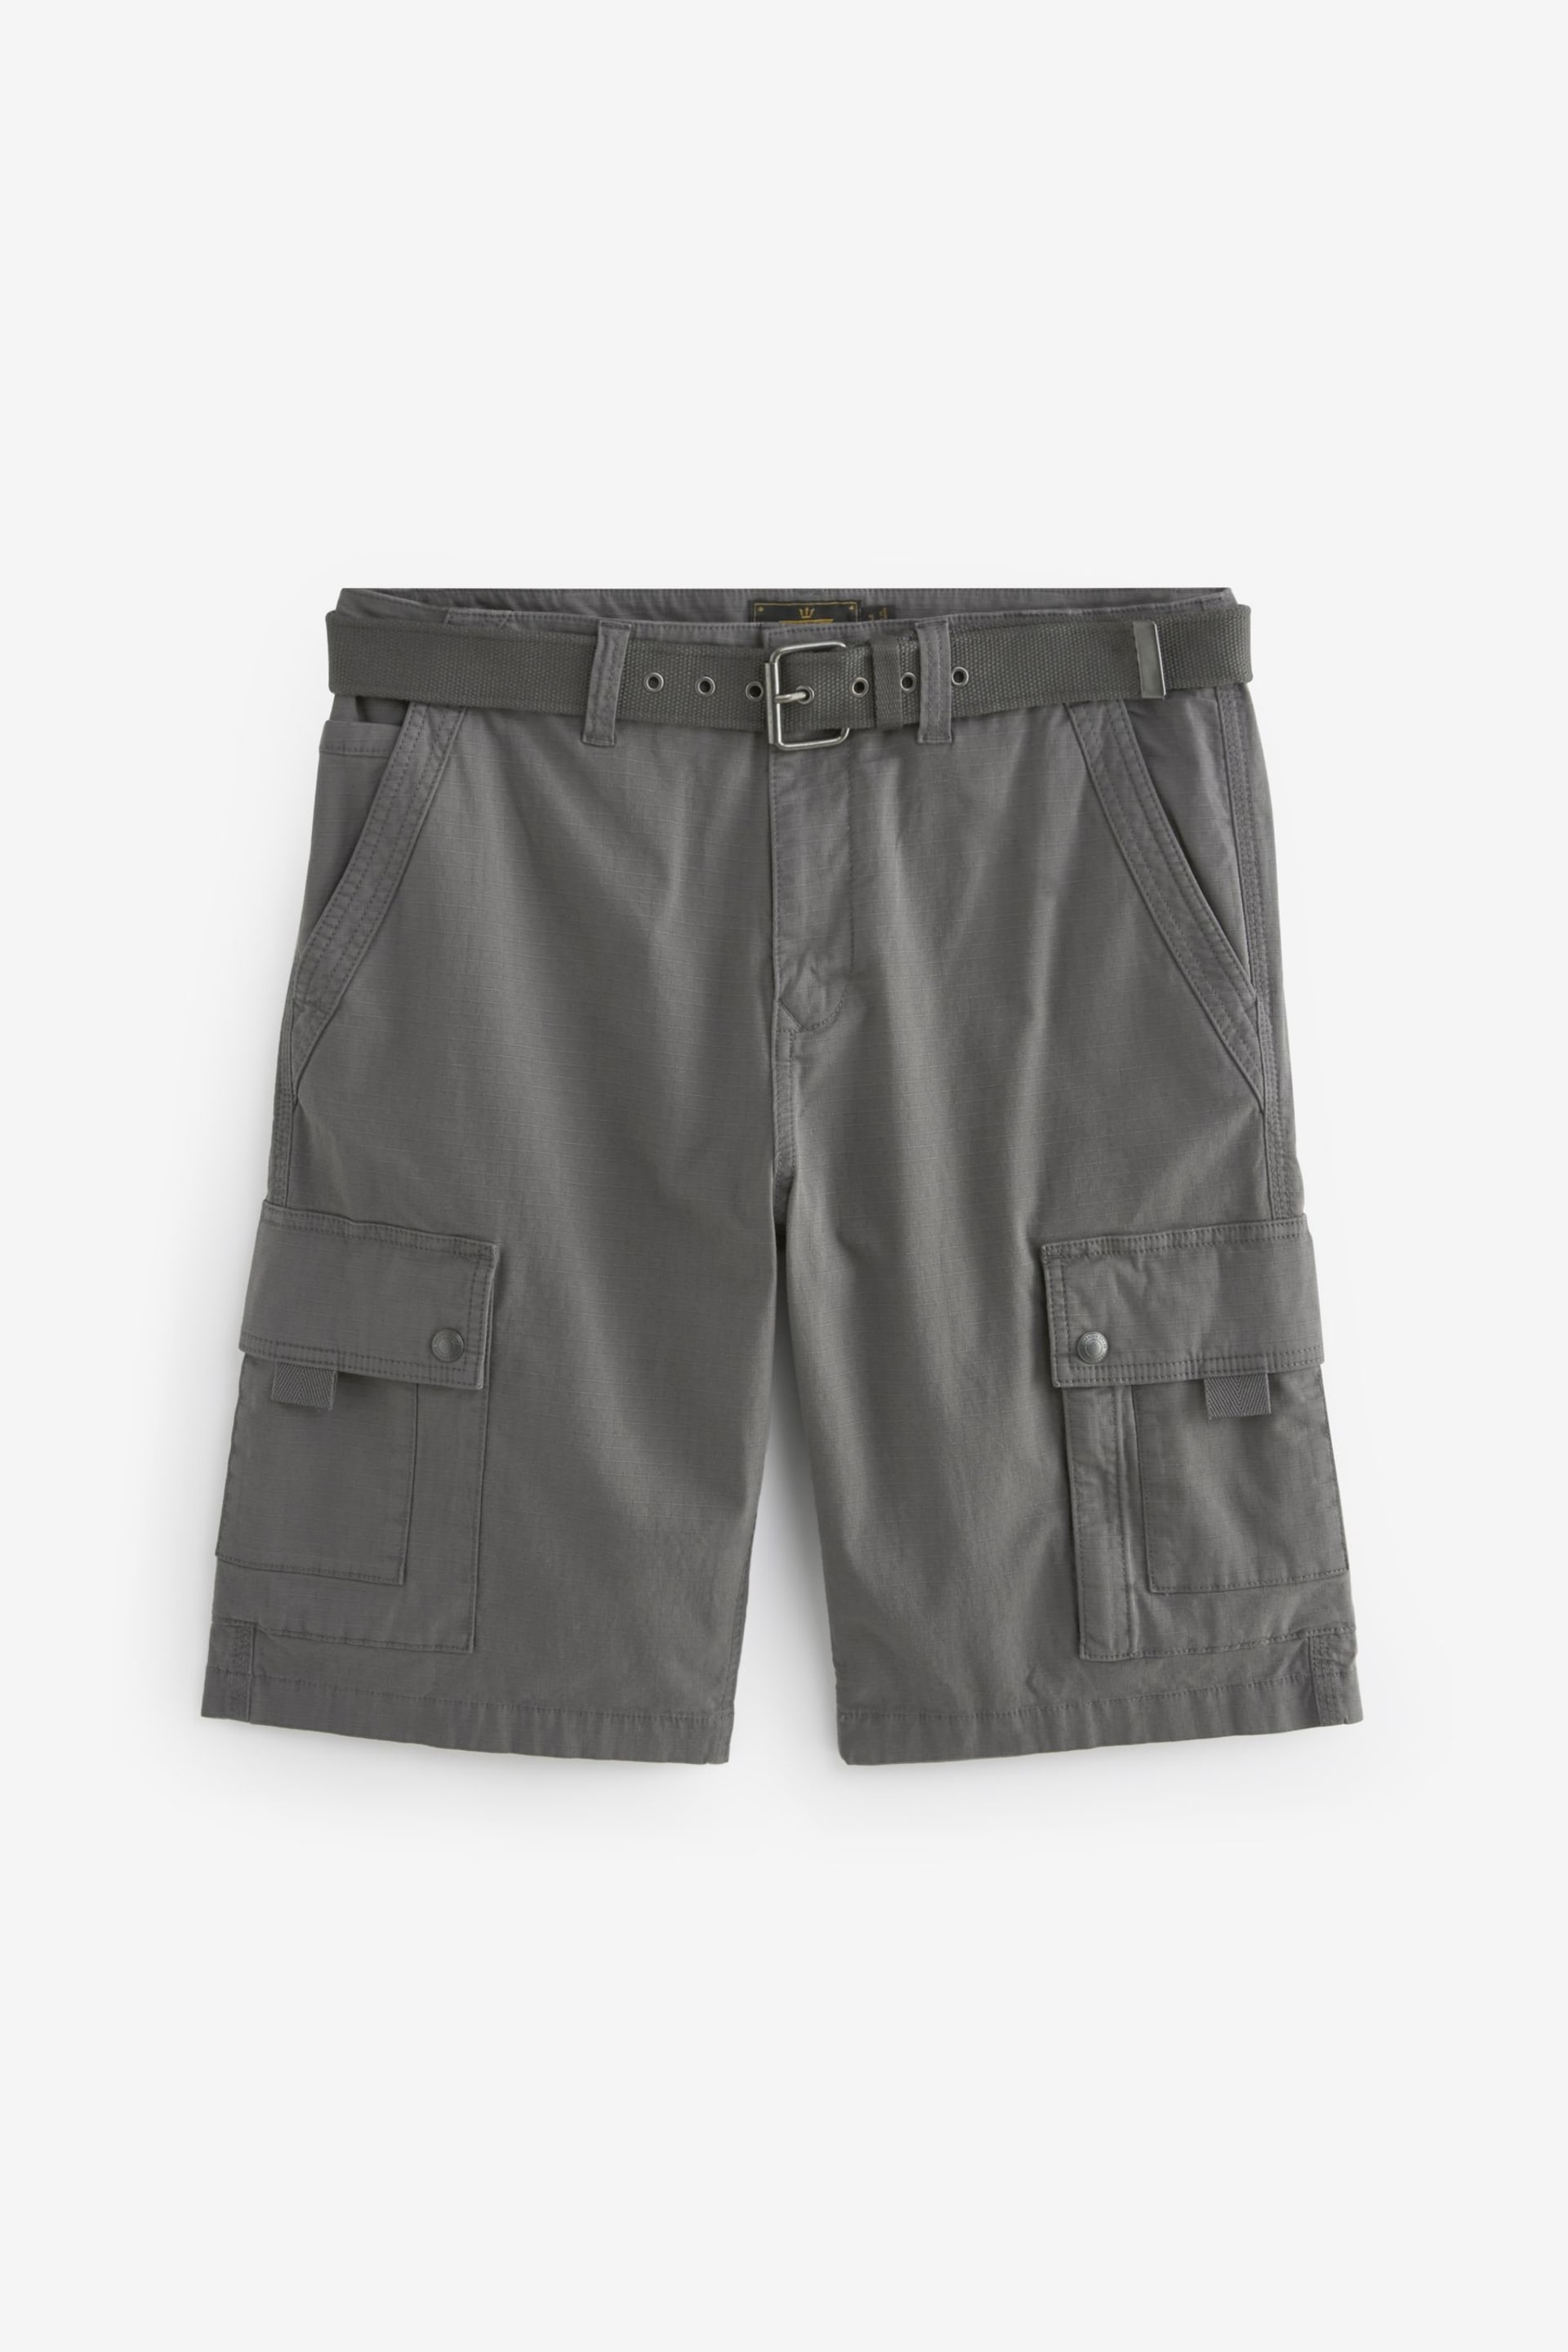 Charcoal Grey Belted Cargo Shorts - Image 1 of 1